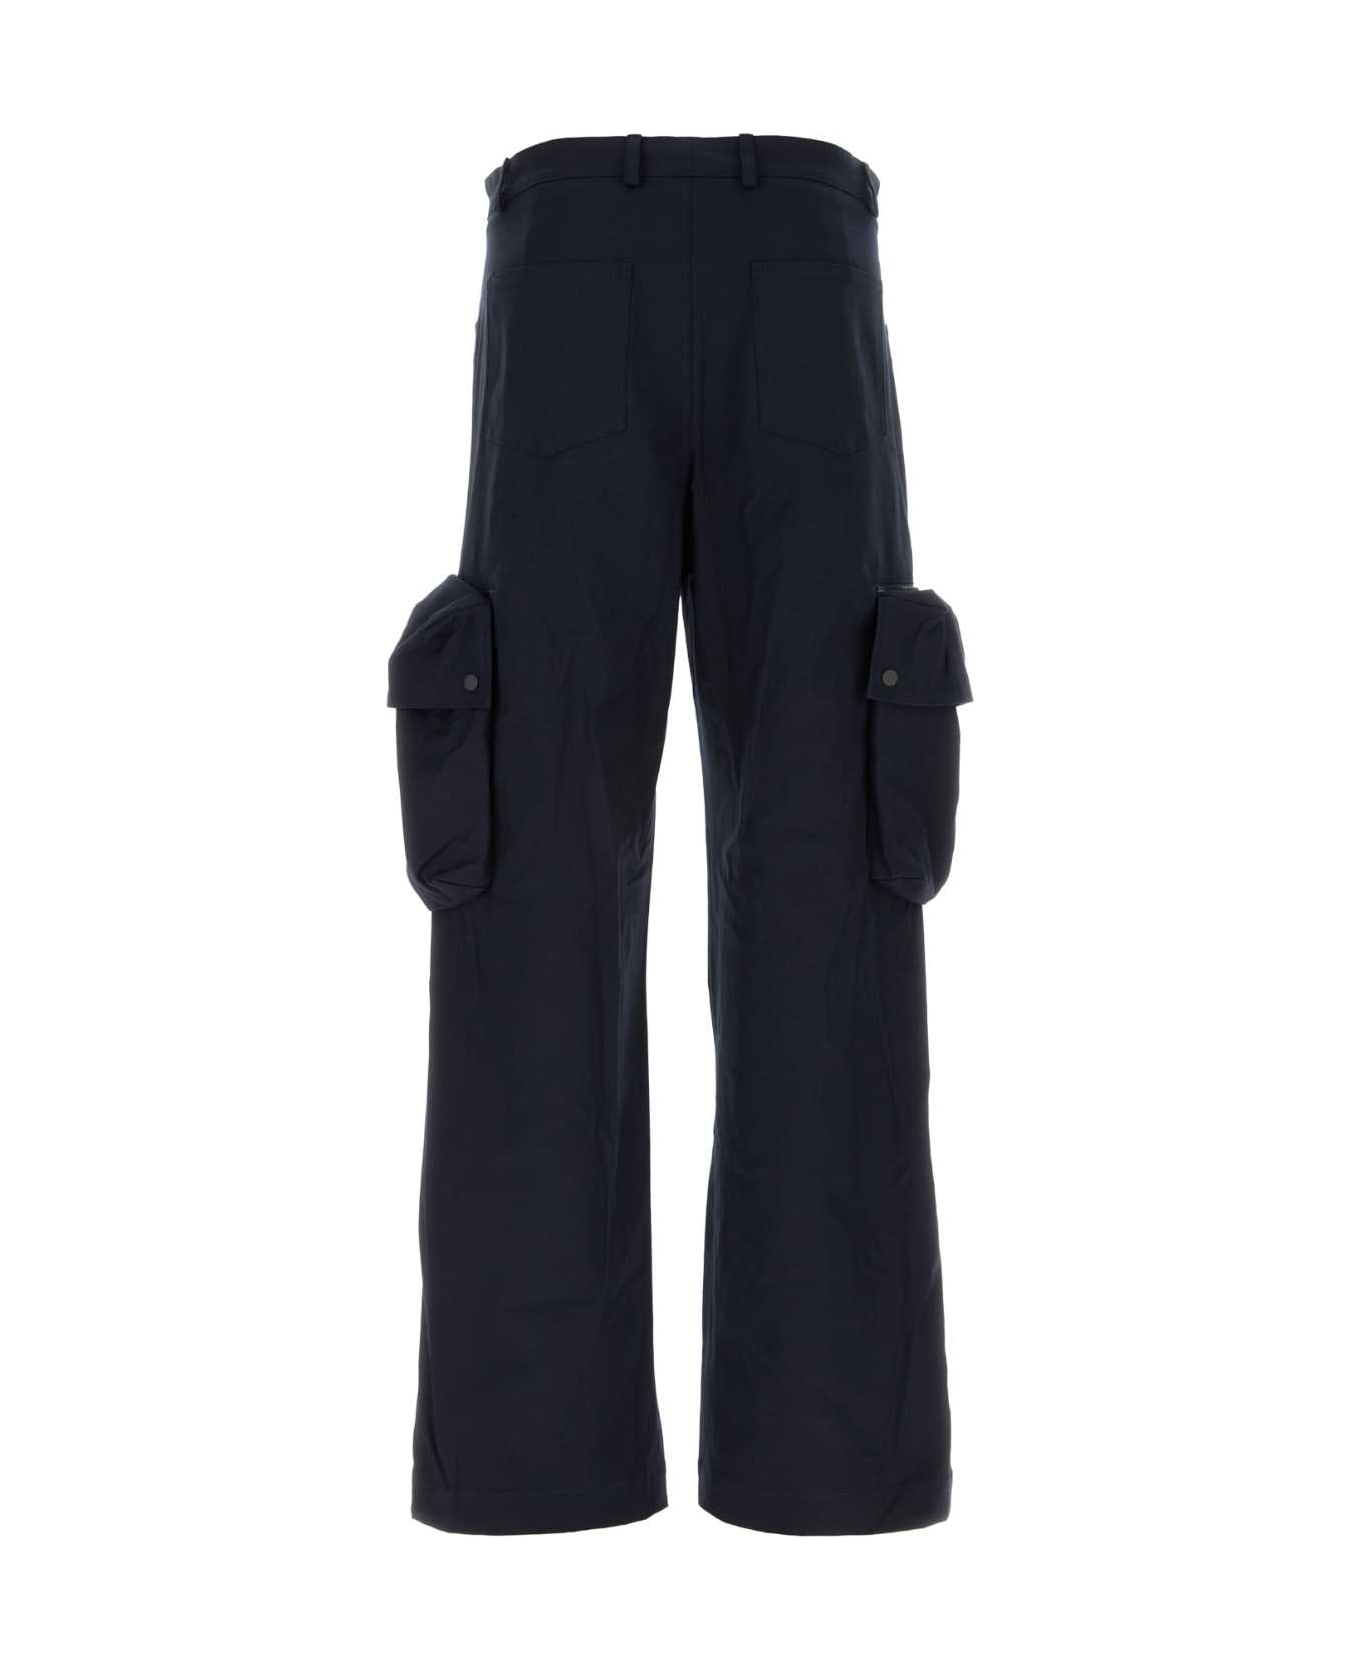 Botter Midnight Blue Stretch Cotton Cargo Pant - COTTON STRETCH NAVY ボトムス